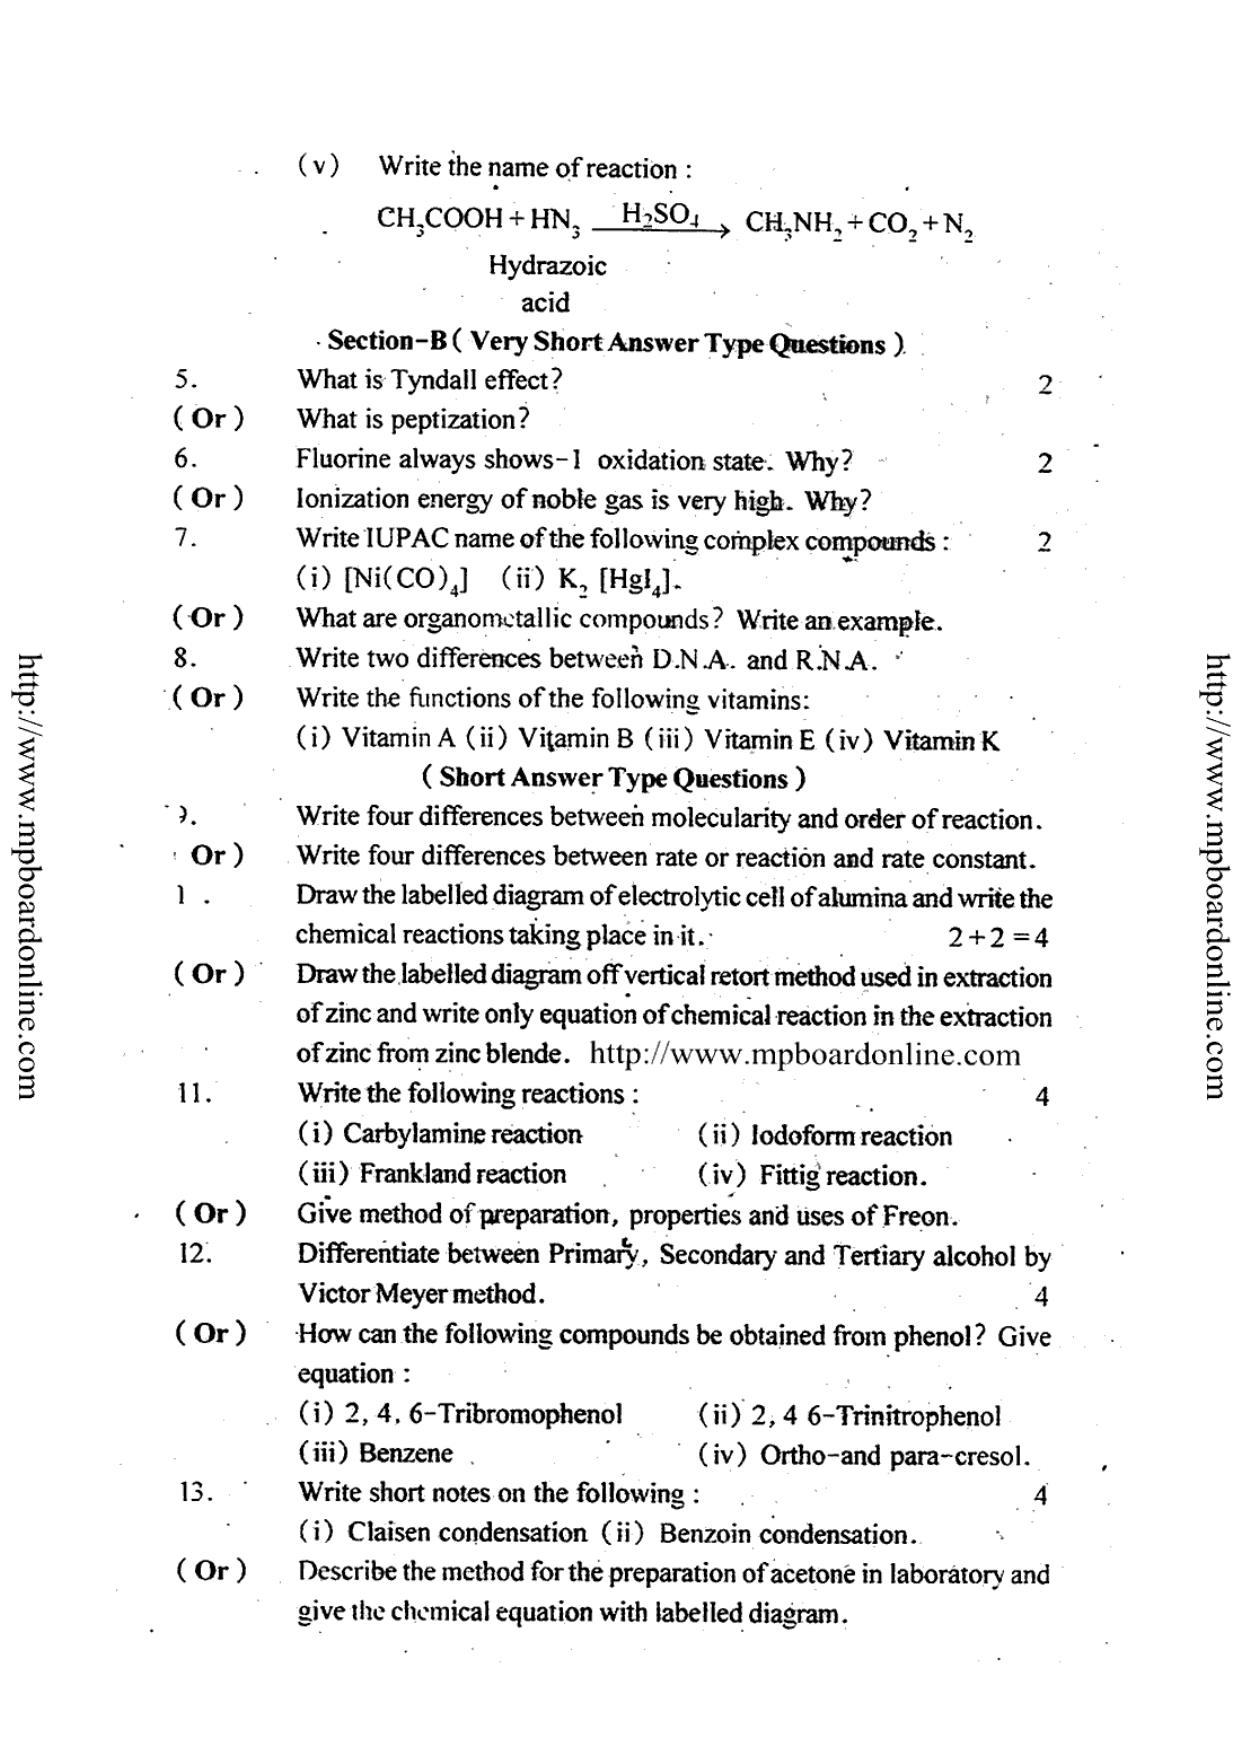 MP Board Class 12 Chemistry (English Medium) 2014 Question Paper - Page 3